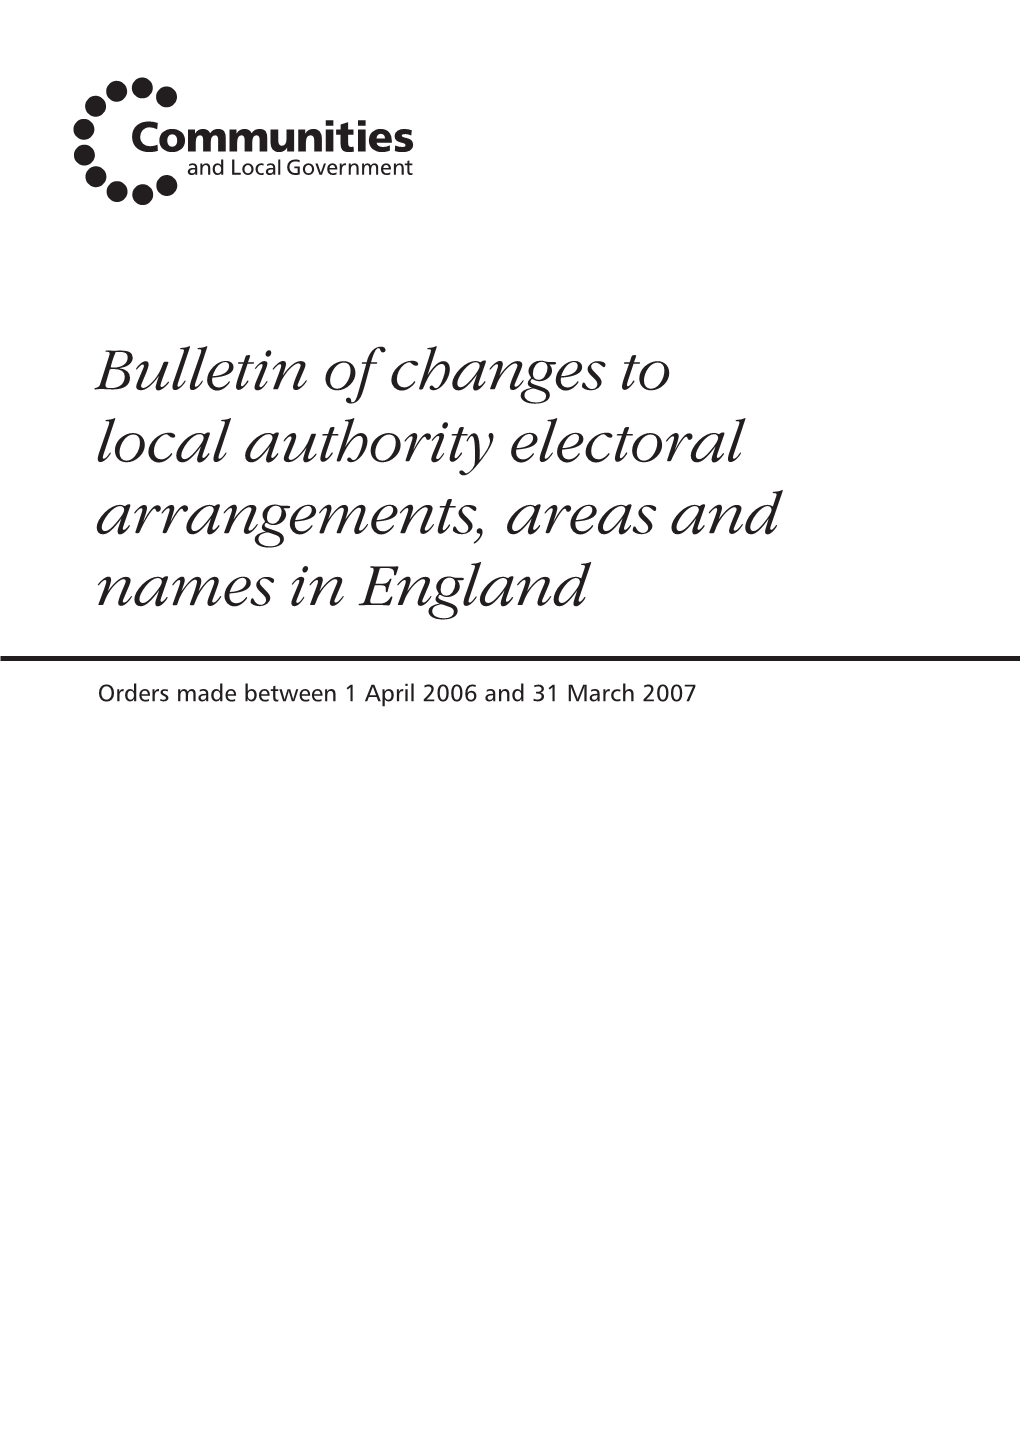 Bulletin of Changes to Local Authority Electoral Arrangements, Areas and Names in England